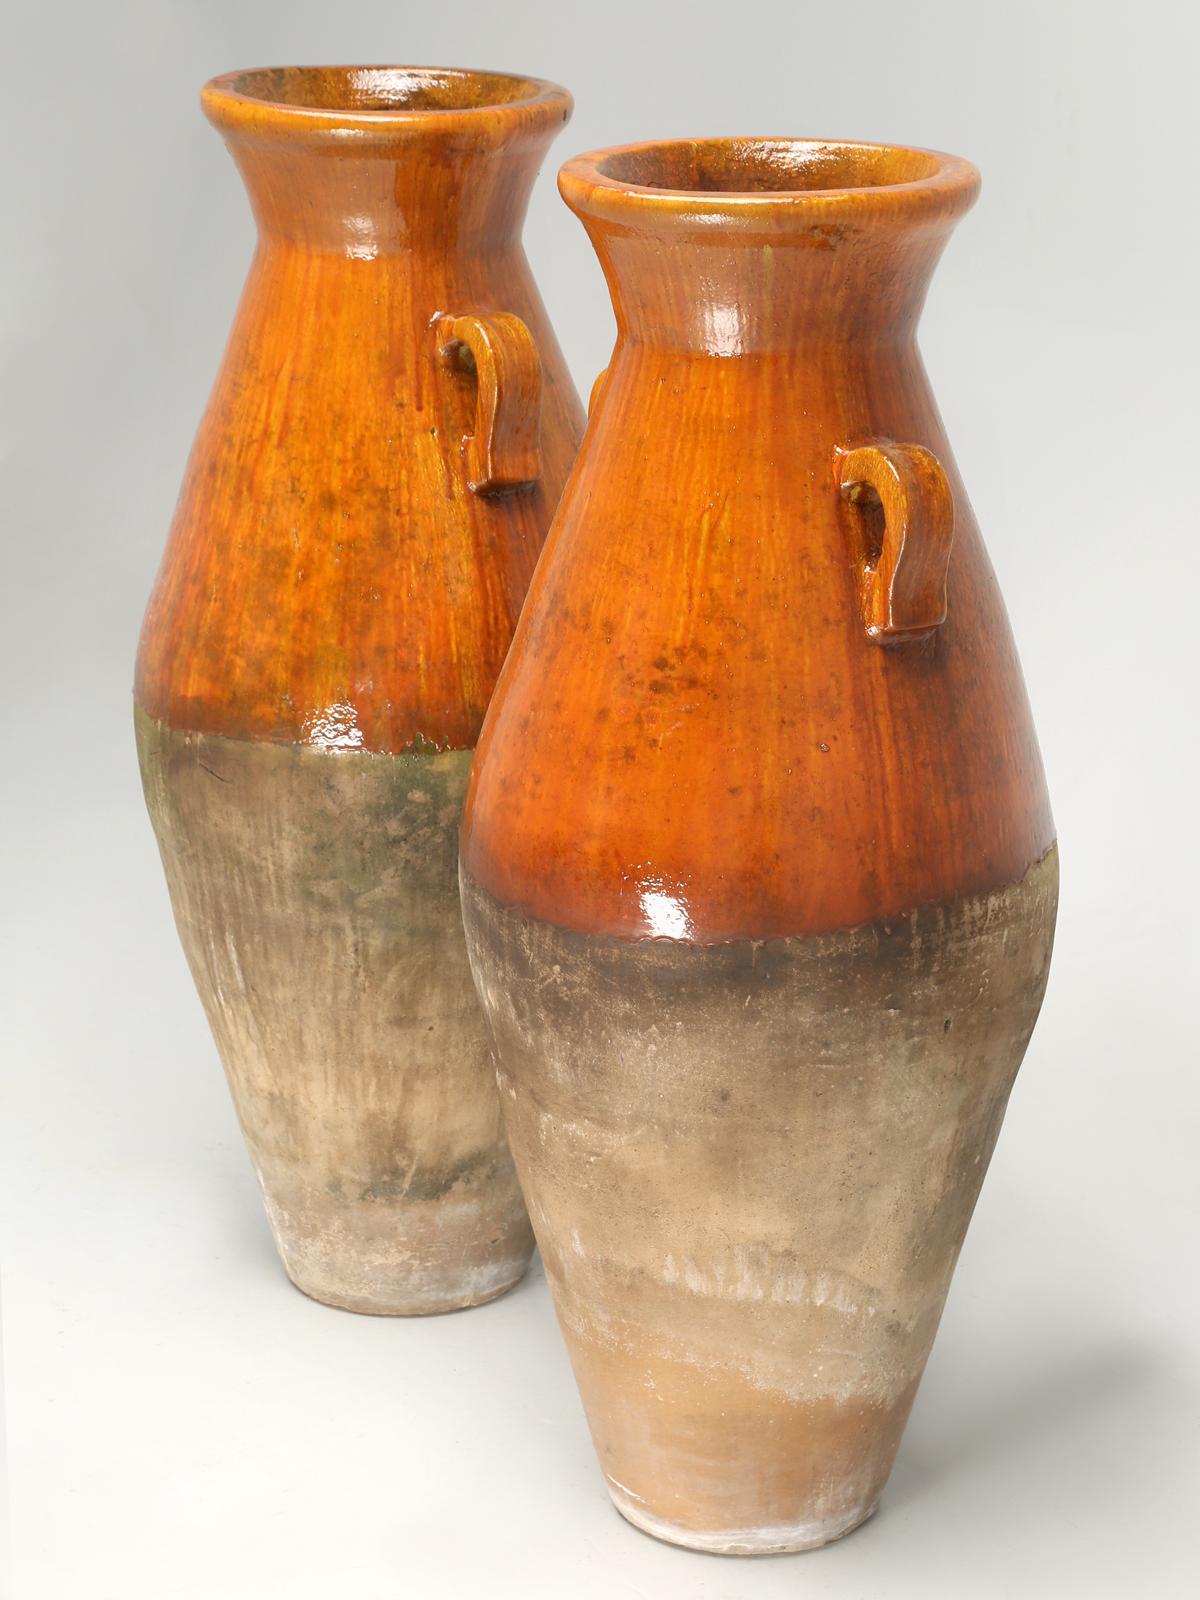 Huge olive oil jar, but are technically called an amphora (Greek: amphoreus), which is a type of container, with two vertical handles in a specific shape and size, designed to carry wine and olive oil. Amphora is derived from the Greek word